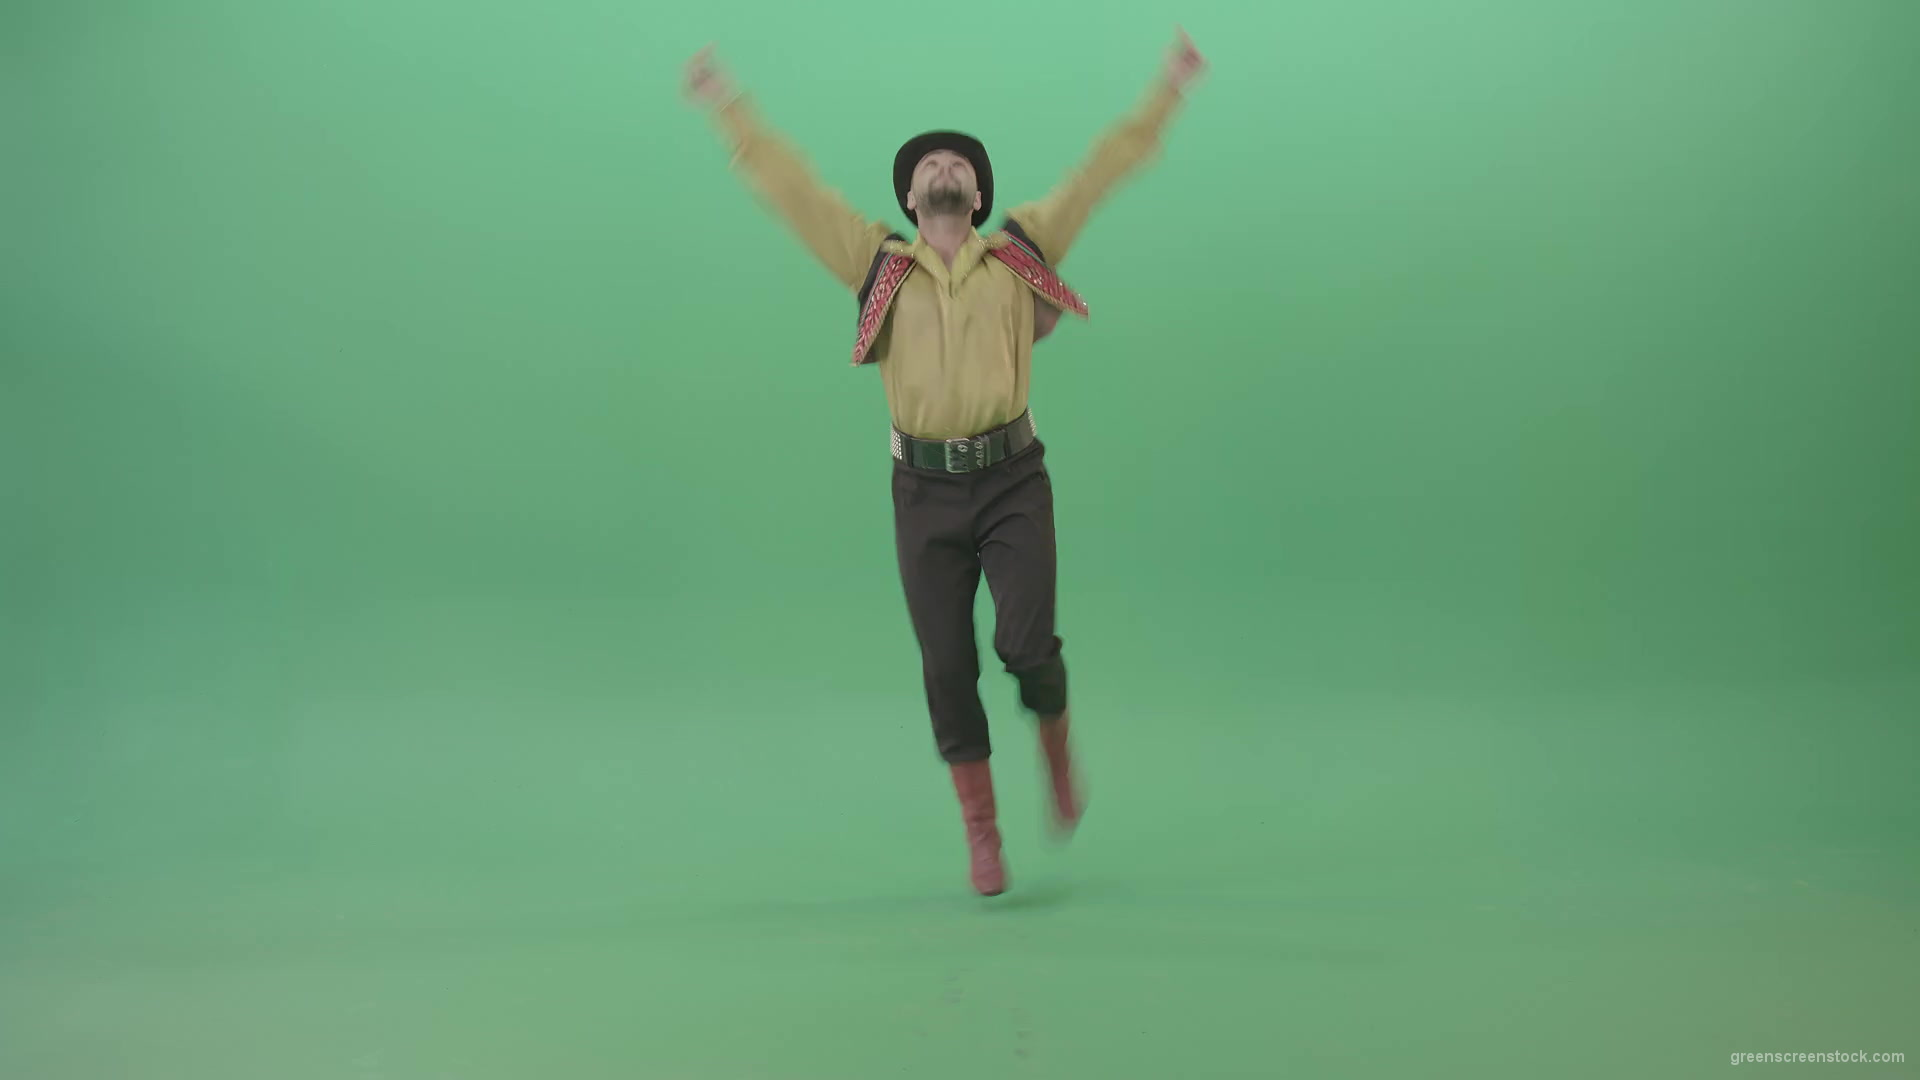 Funny-dancing-Gipsy-in-Moldova-jumping-isolated-on-Green-Screen-4K-Video-Footage-1920_009 Green Screen Stock